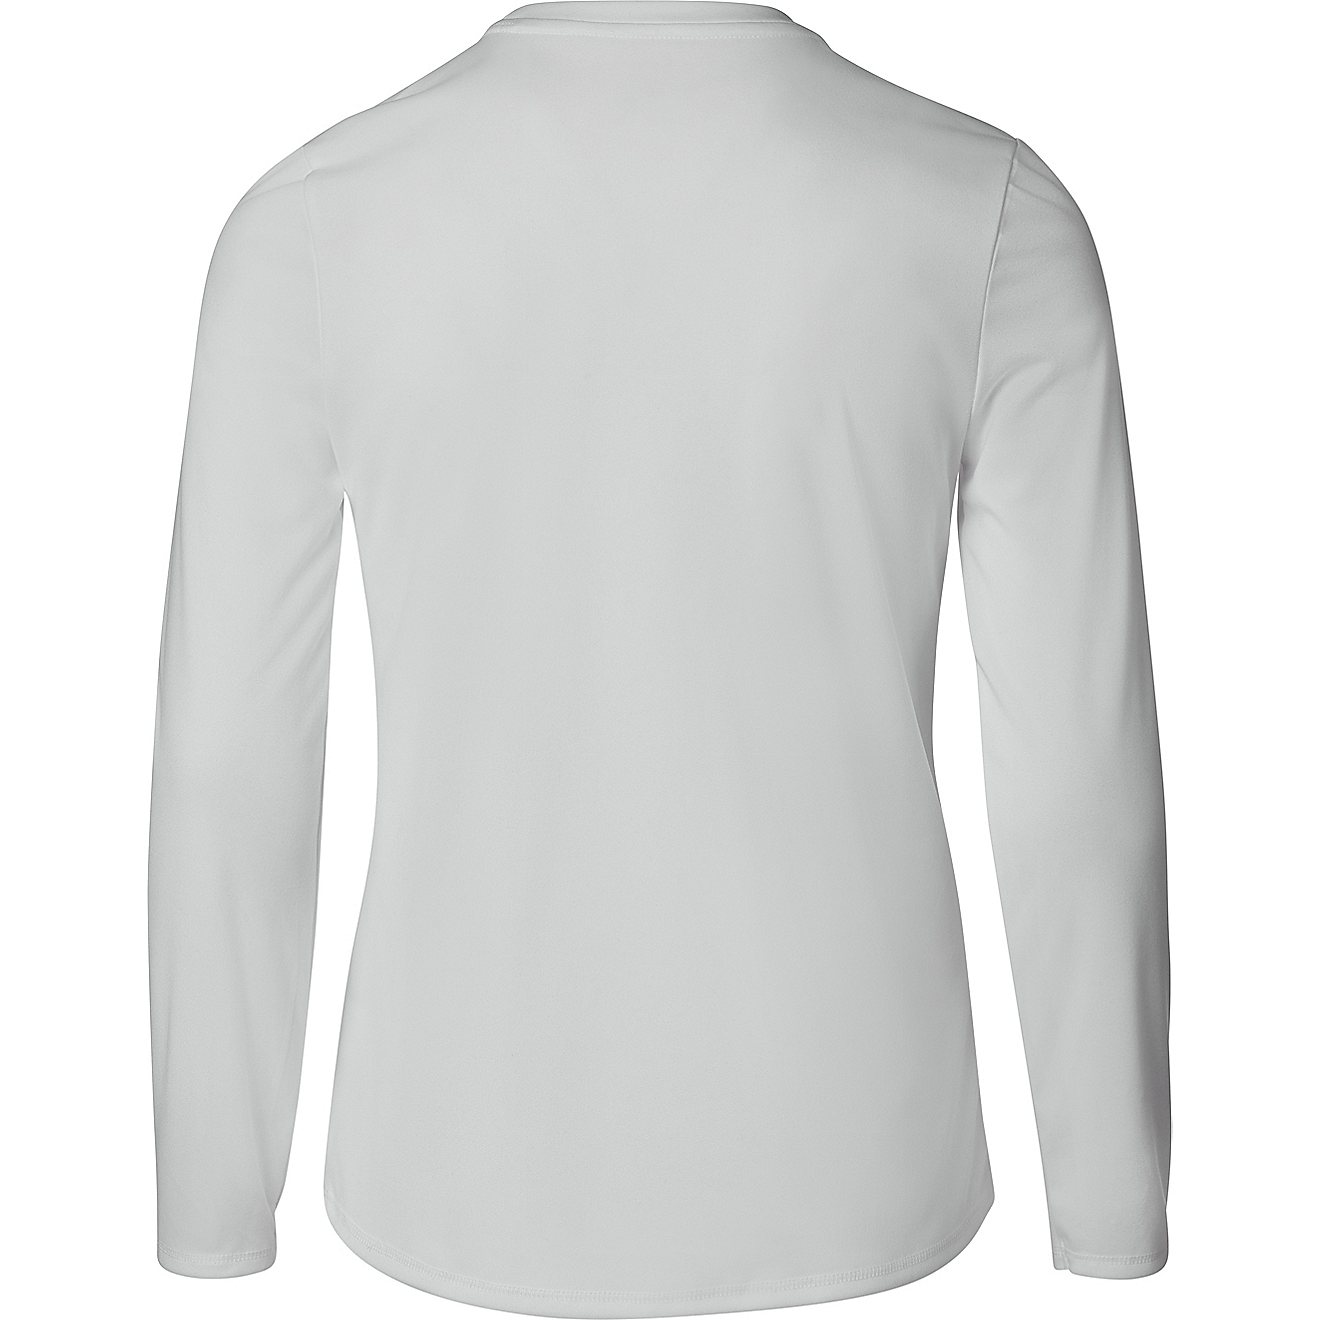 BCG Girls' Turbo Solid Long Sleeve T-shirt                                                                                       - view number 2